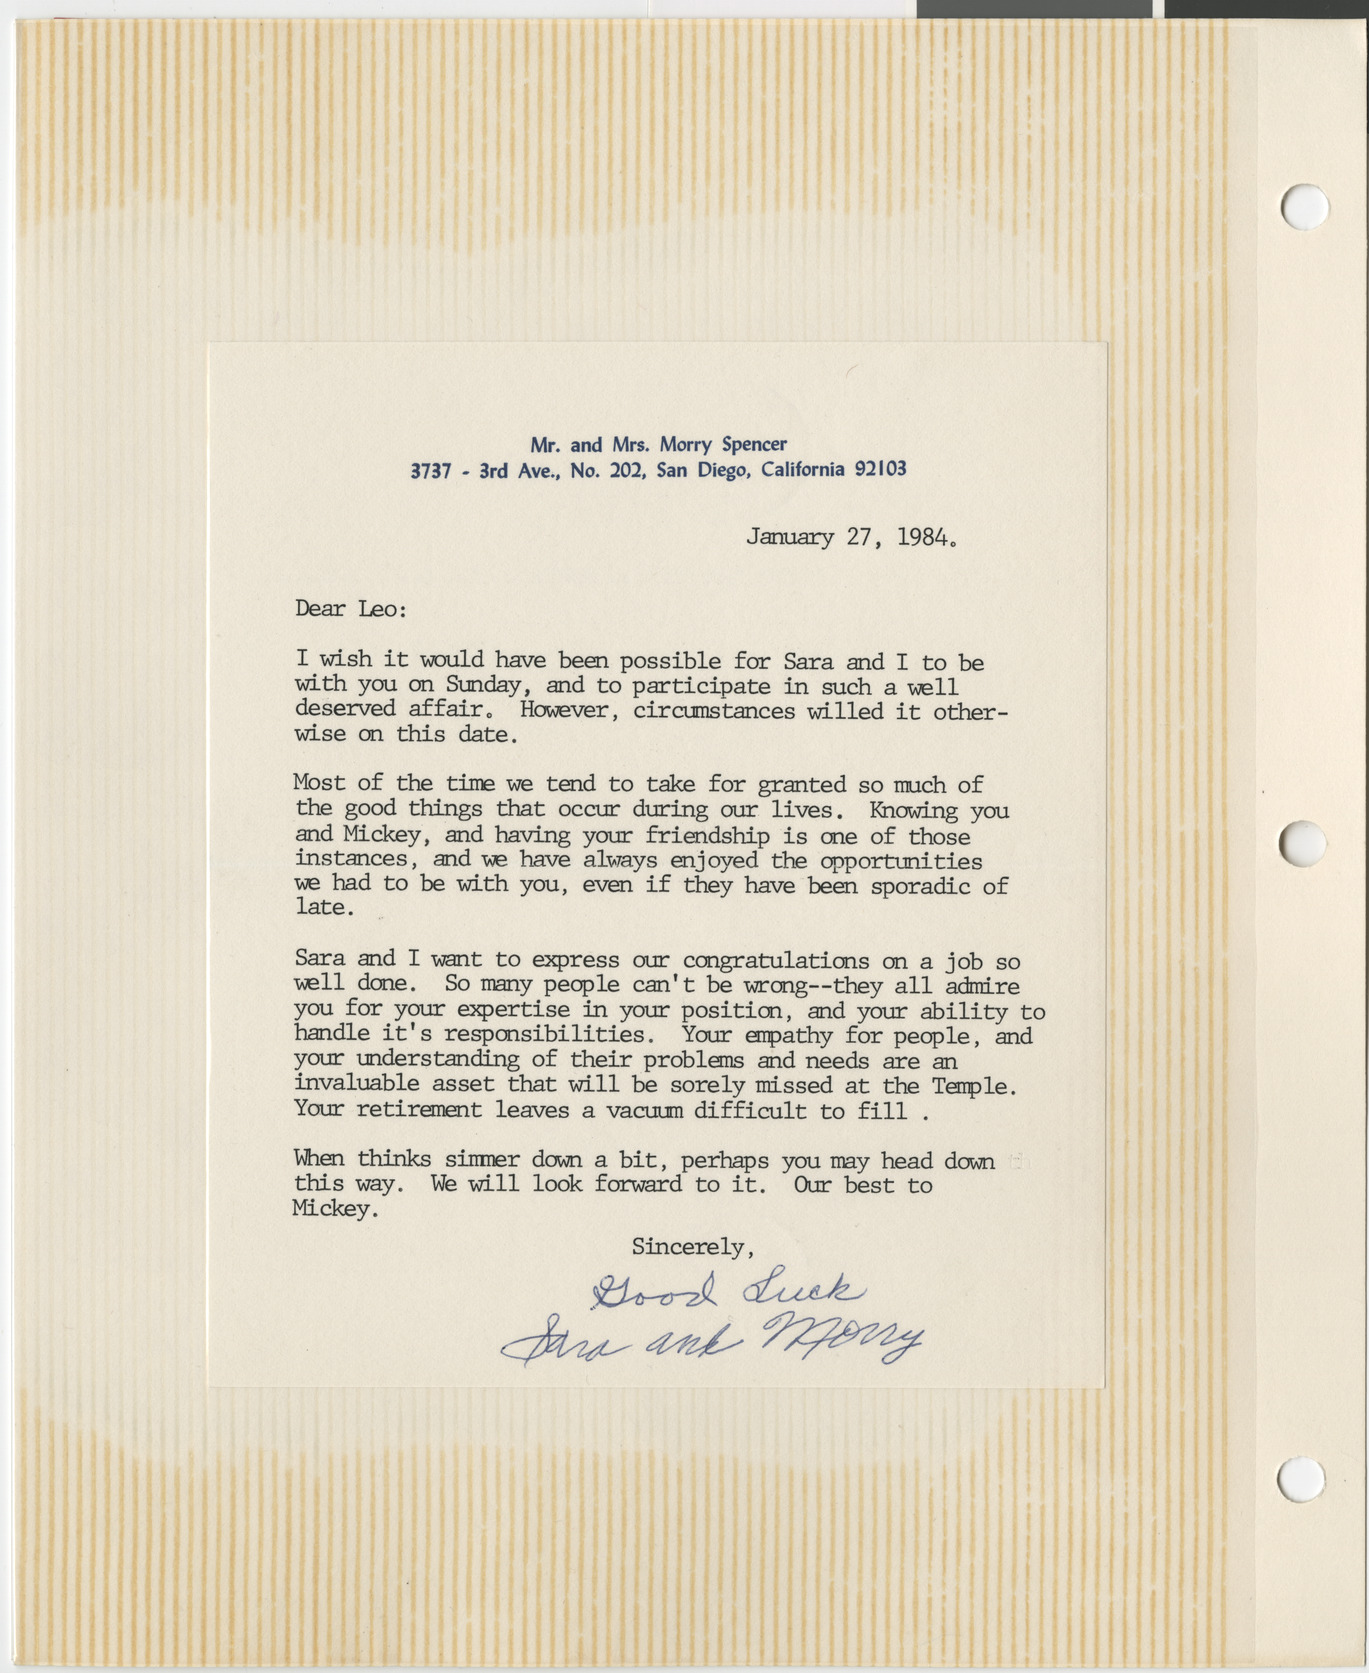 Letter from Sara and Morry Spencer (San Diego, Calif.) to Leo Wilner, January 27, 1984